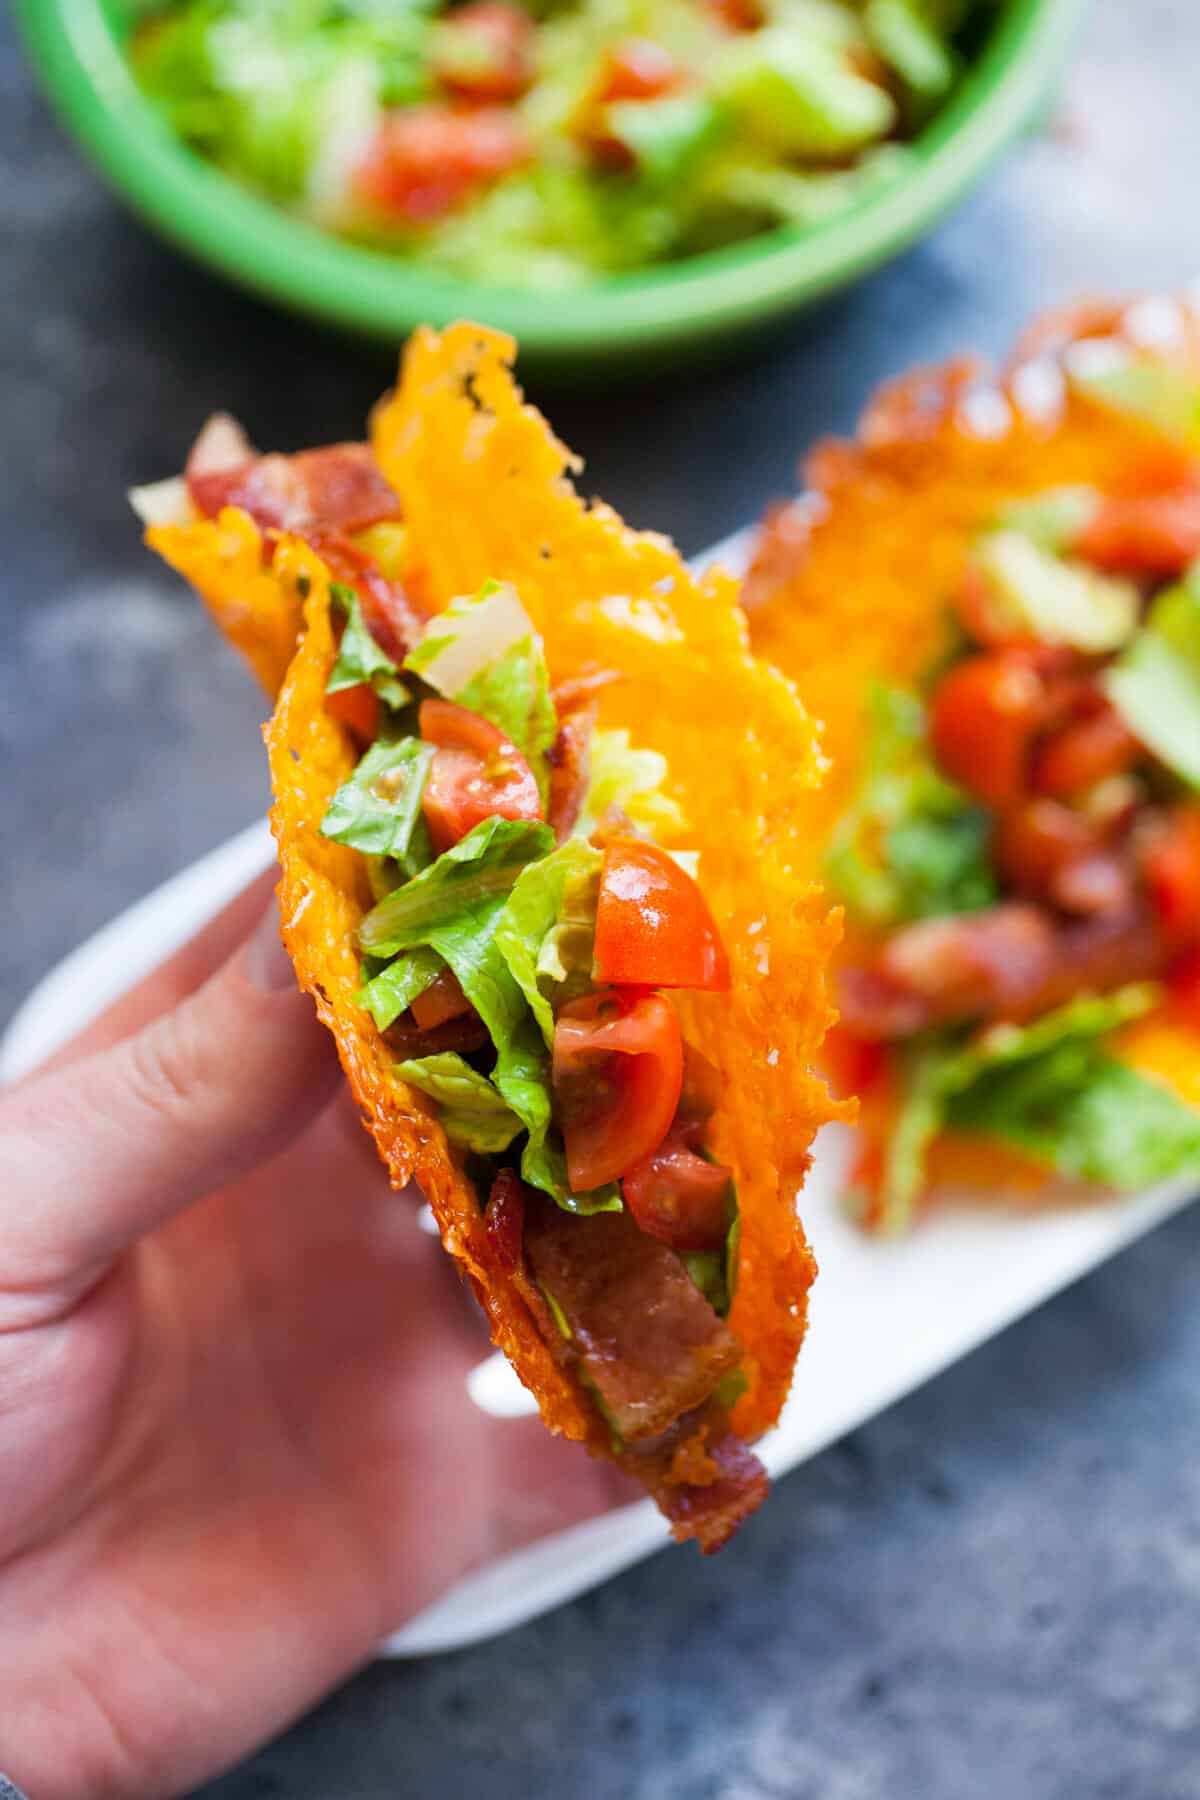 Cheese taco shells with BLT filling.